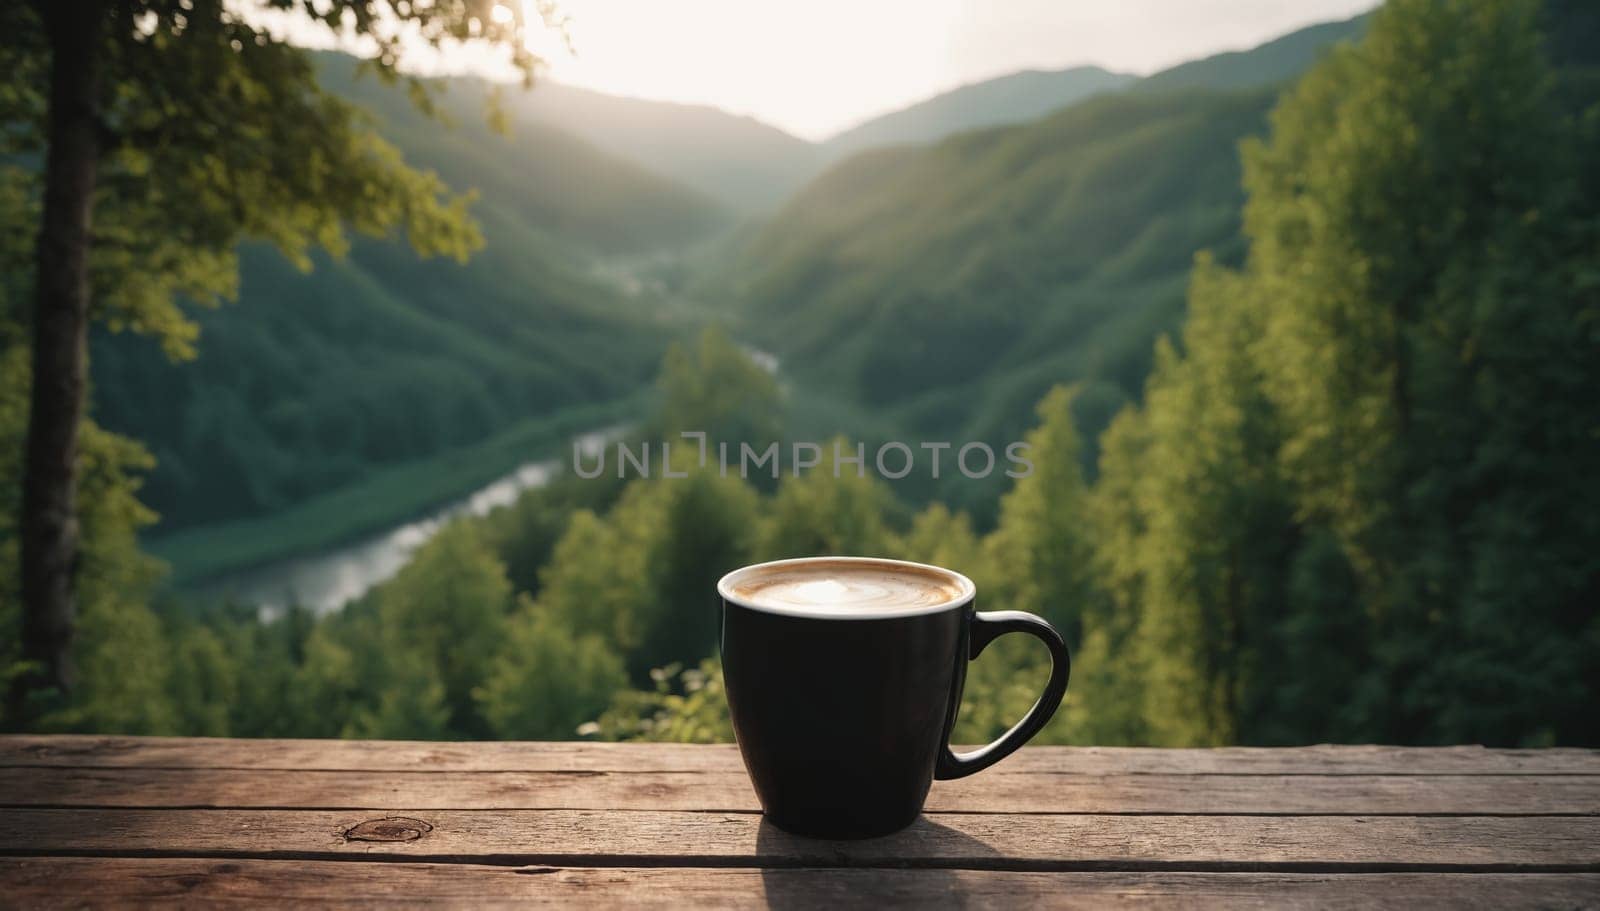 Coffee cup on wooden table in front of beautiful mountain landscape by Andre1ns